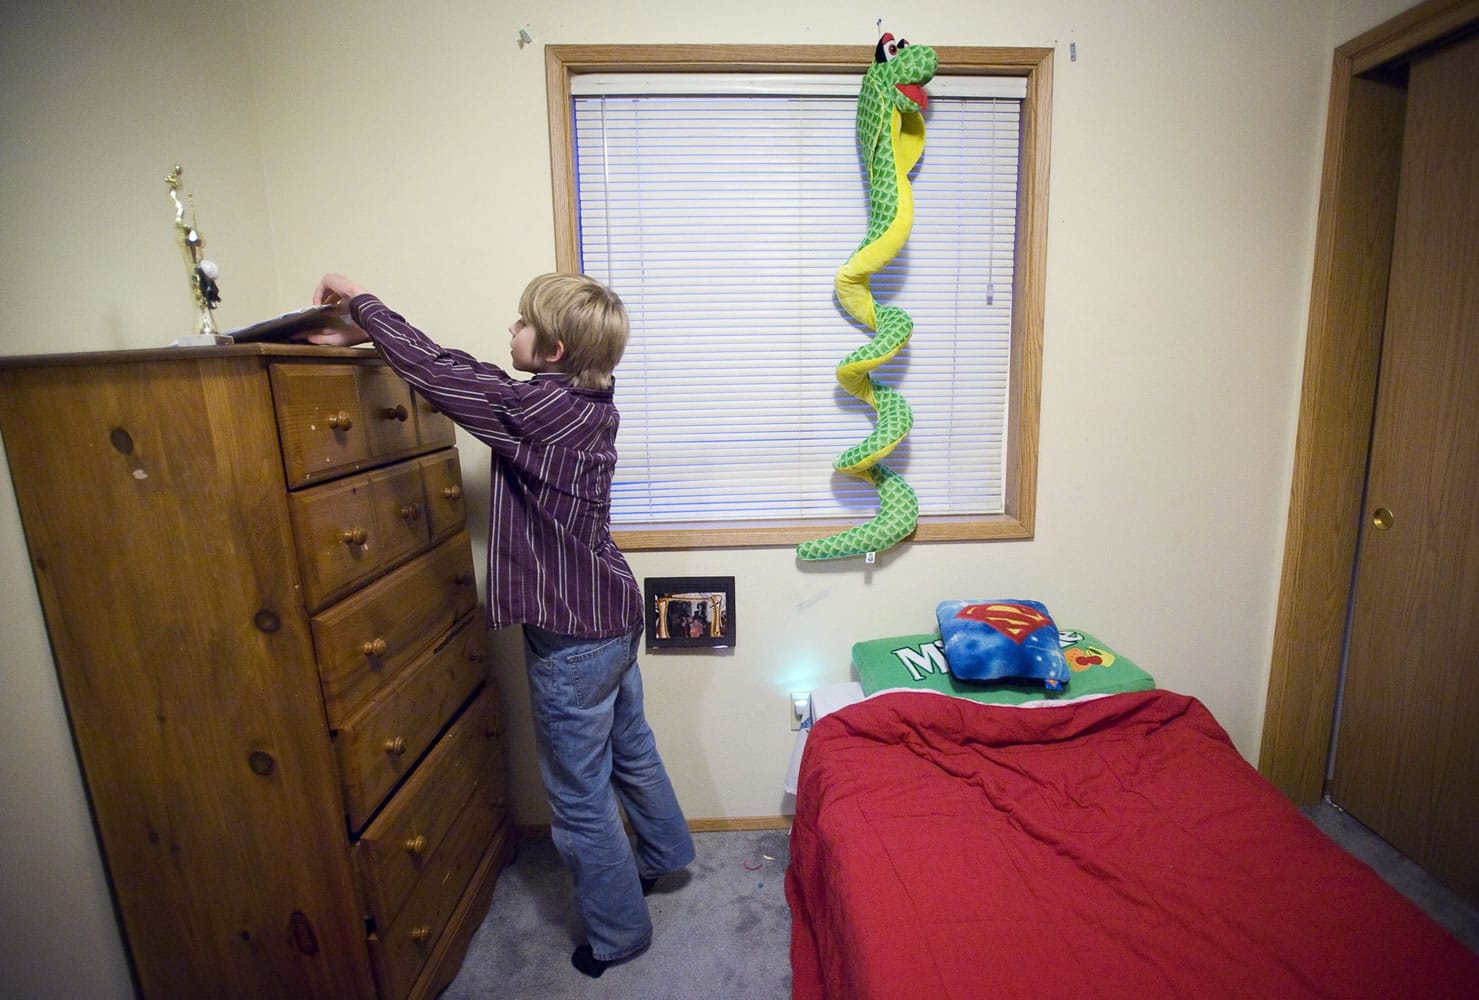 Darian Sund, 9, searches for a pencil in his bedroom so he can draw at his home in Walnut Grove.